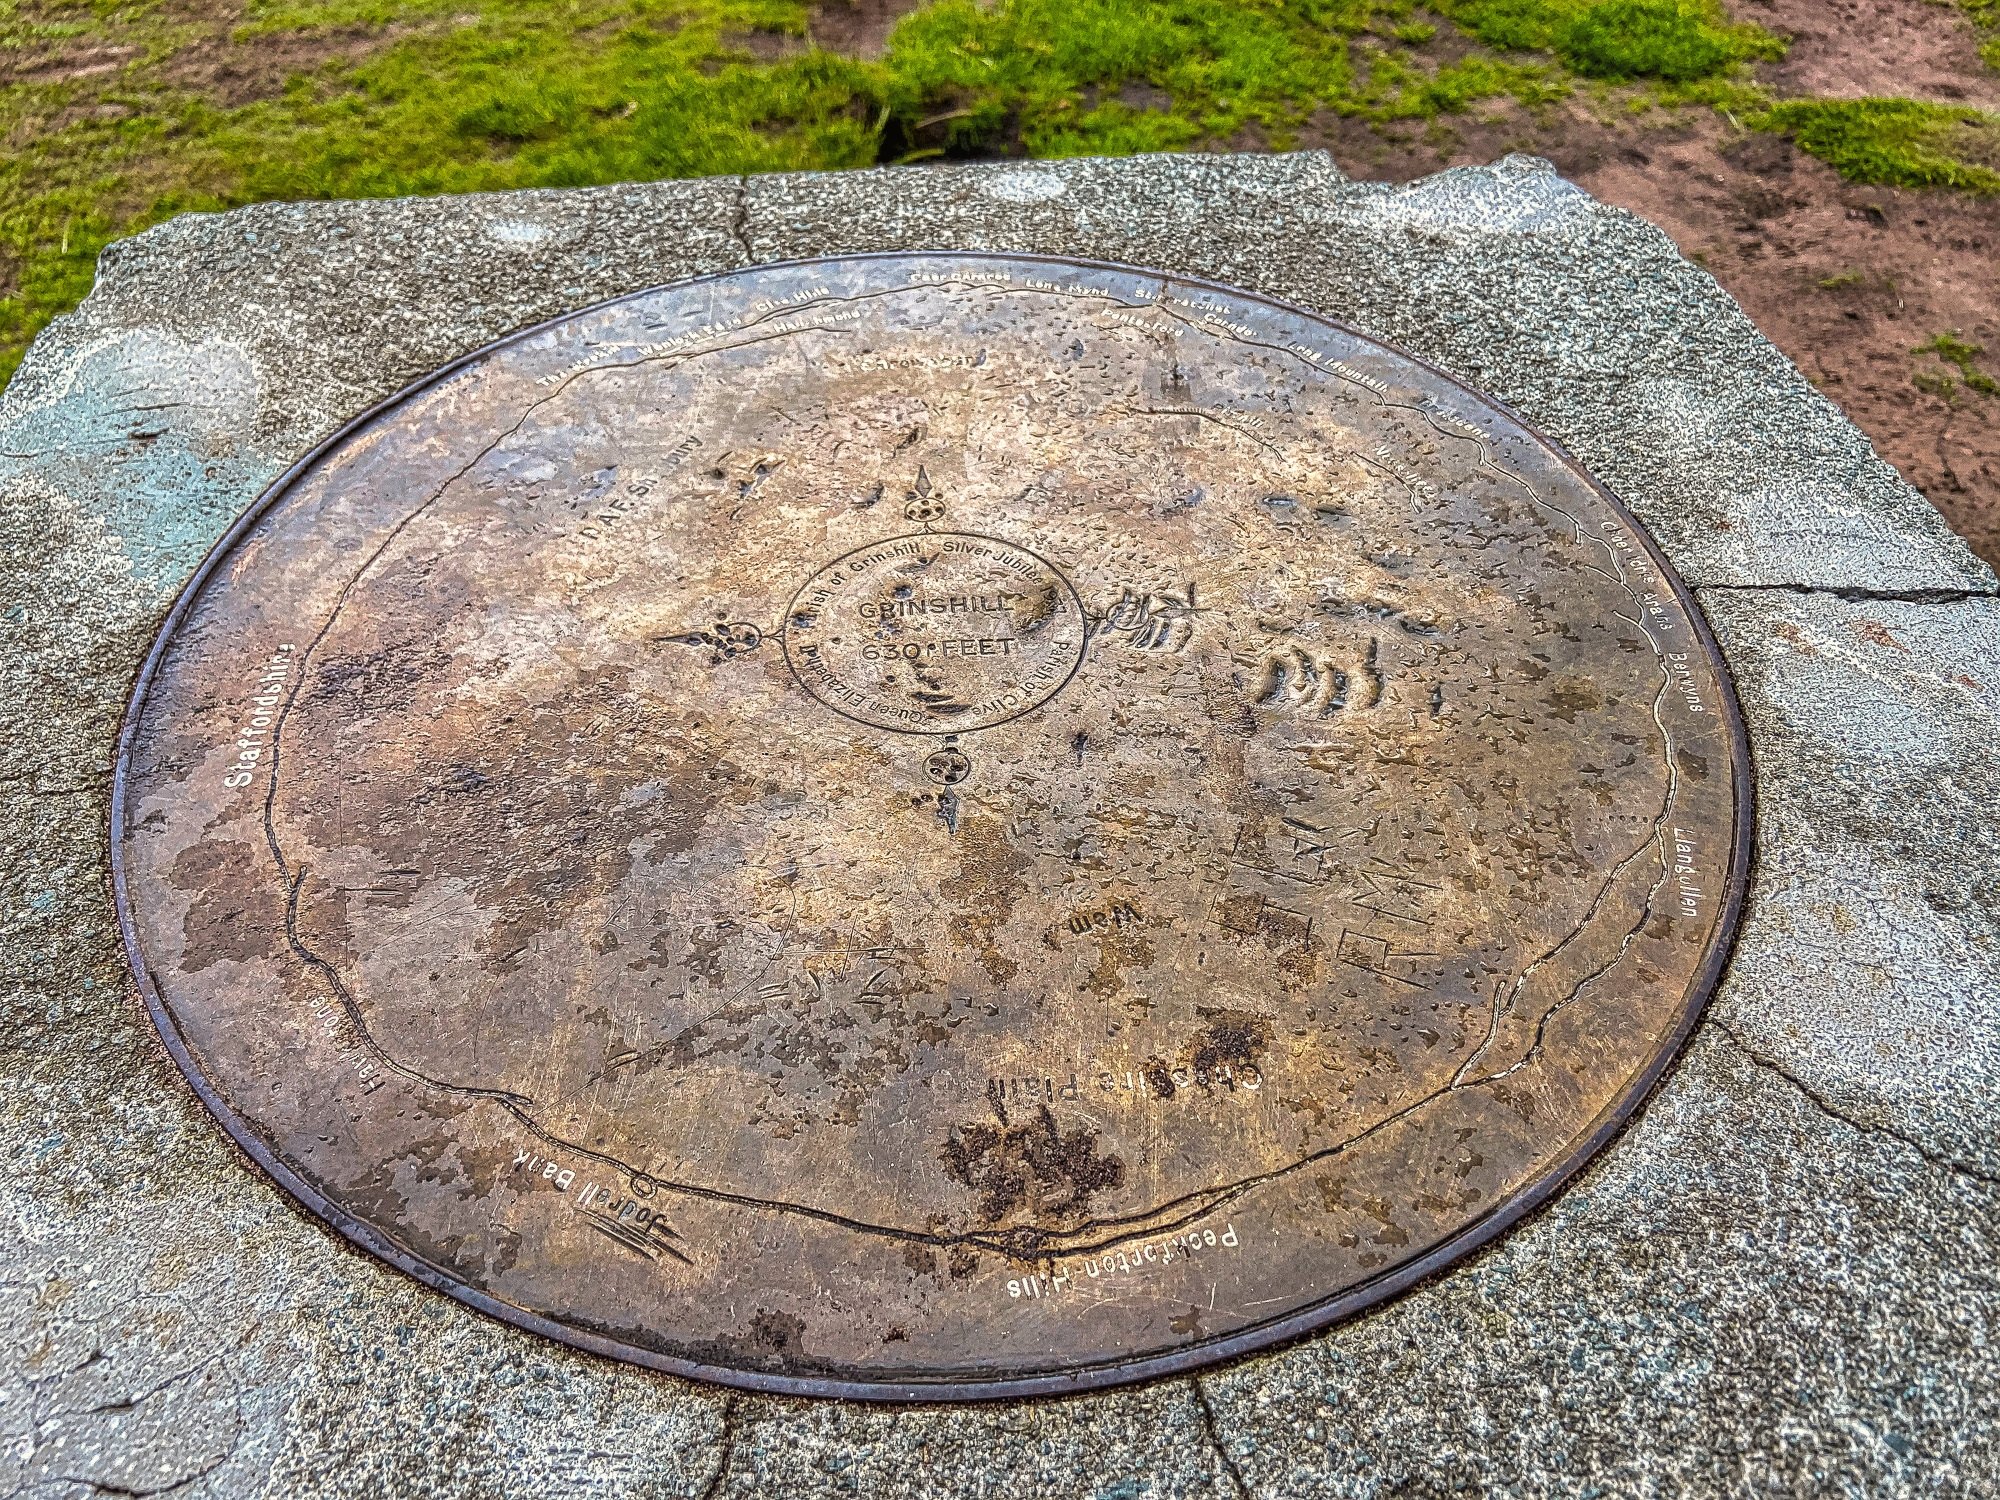  The disc at the top of Grinshill shows the names of the hills you can see.